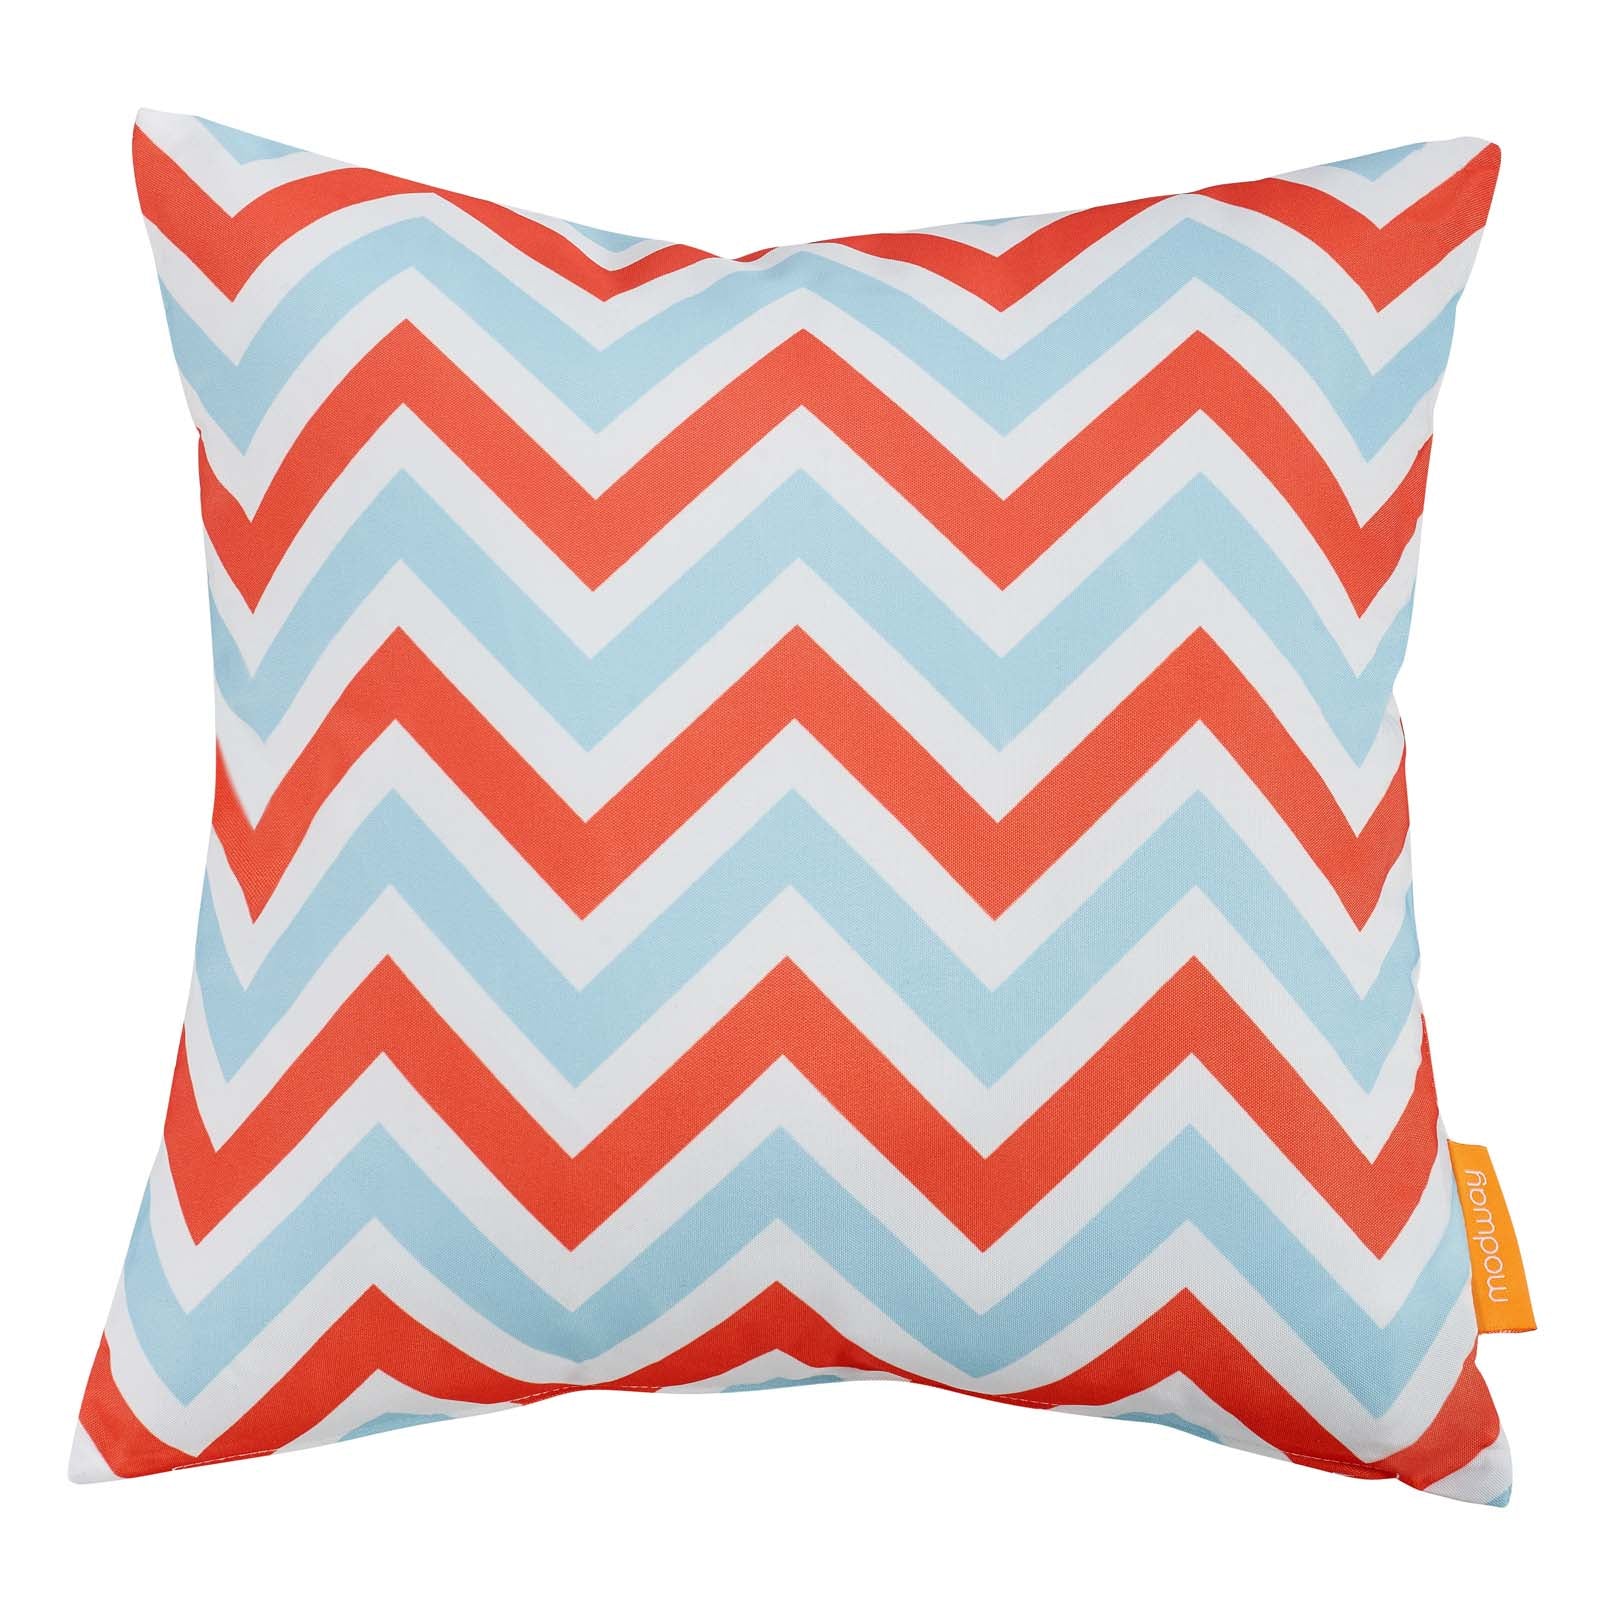 Modway Outdoor Pillows & Cushions - Modway Two Piece Outdoor Patio Pillow Set Zig Zag